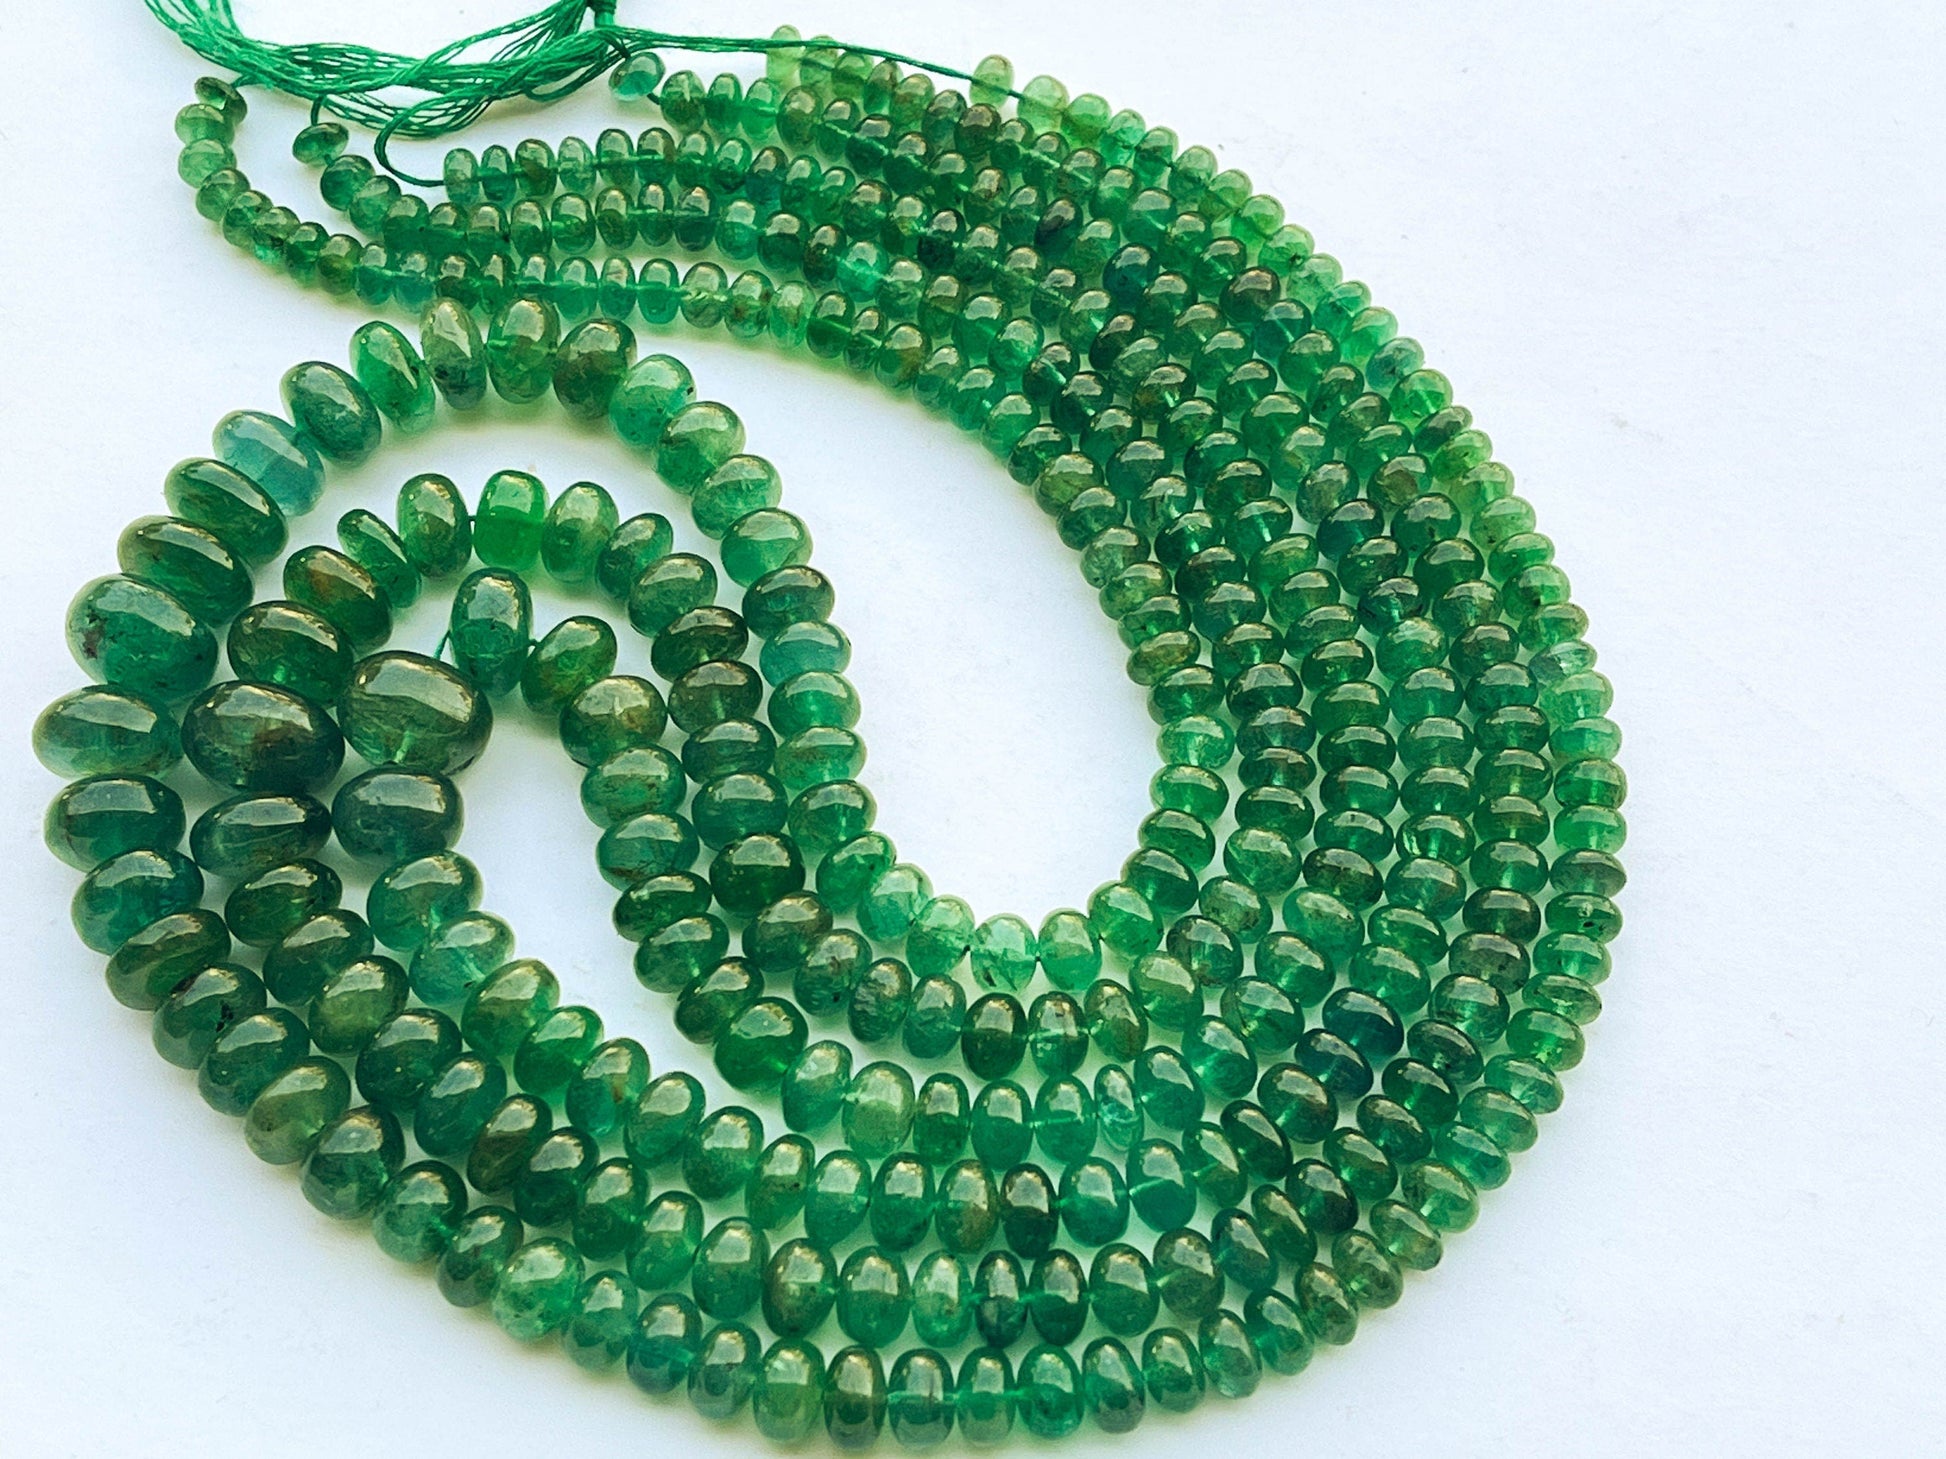 17 Inch Natural Zambian Emerald Smooth Rondelle Shape Beads (No Treatment) Beadsforyourjewelry